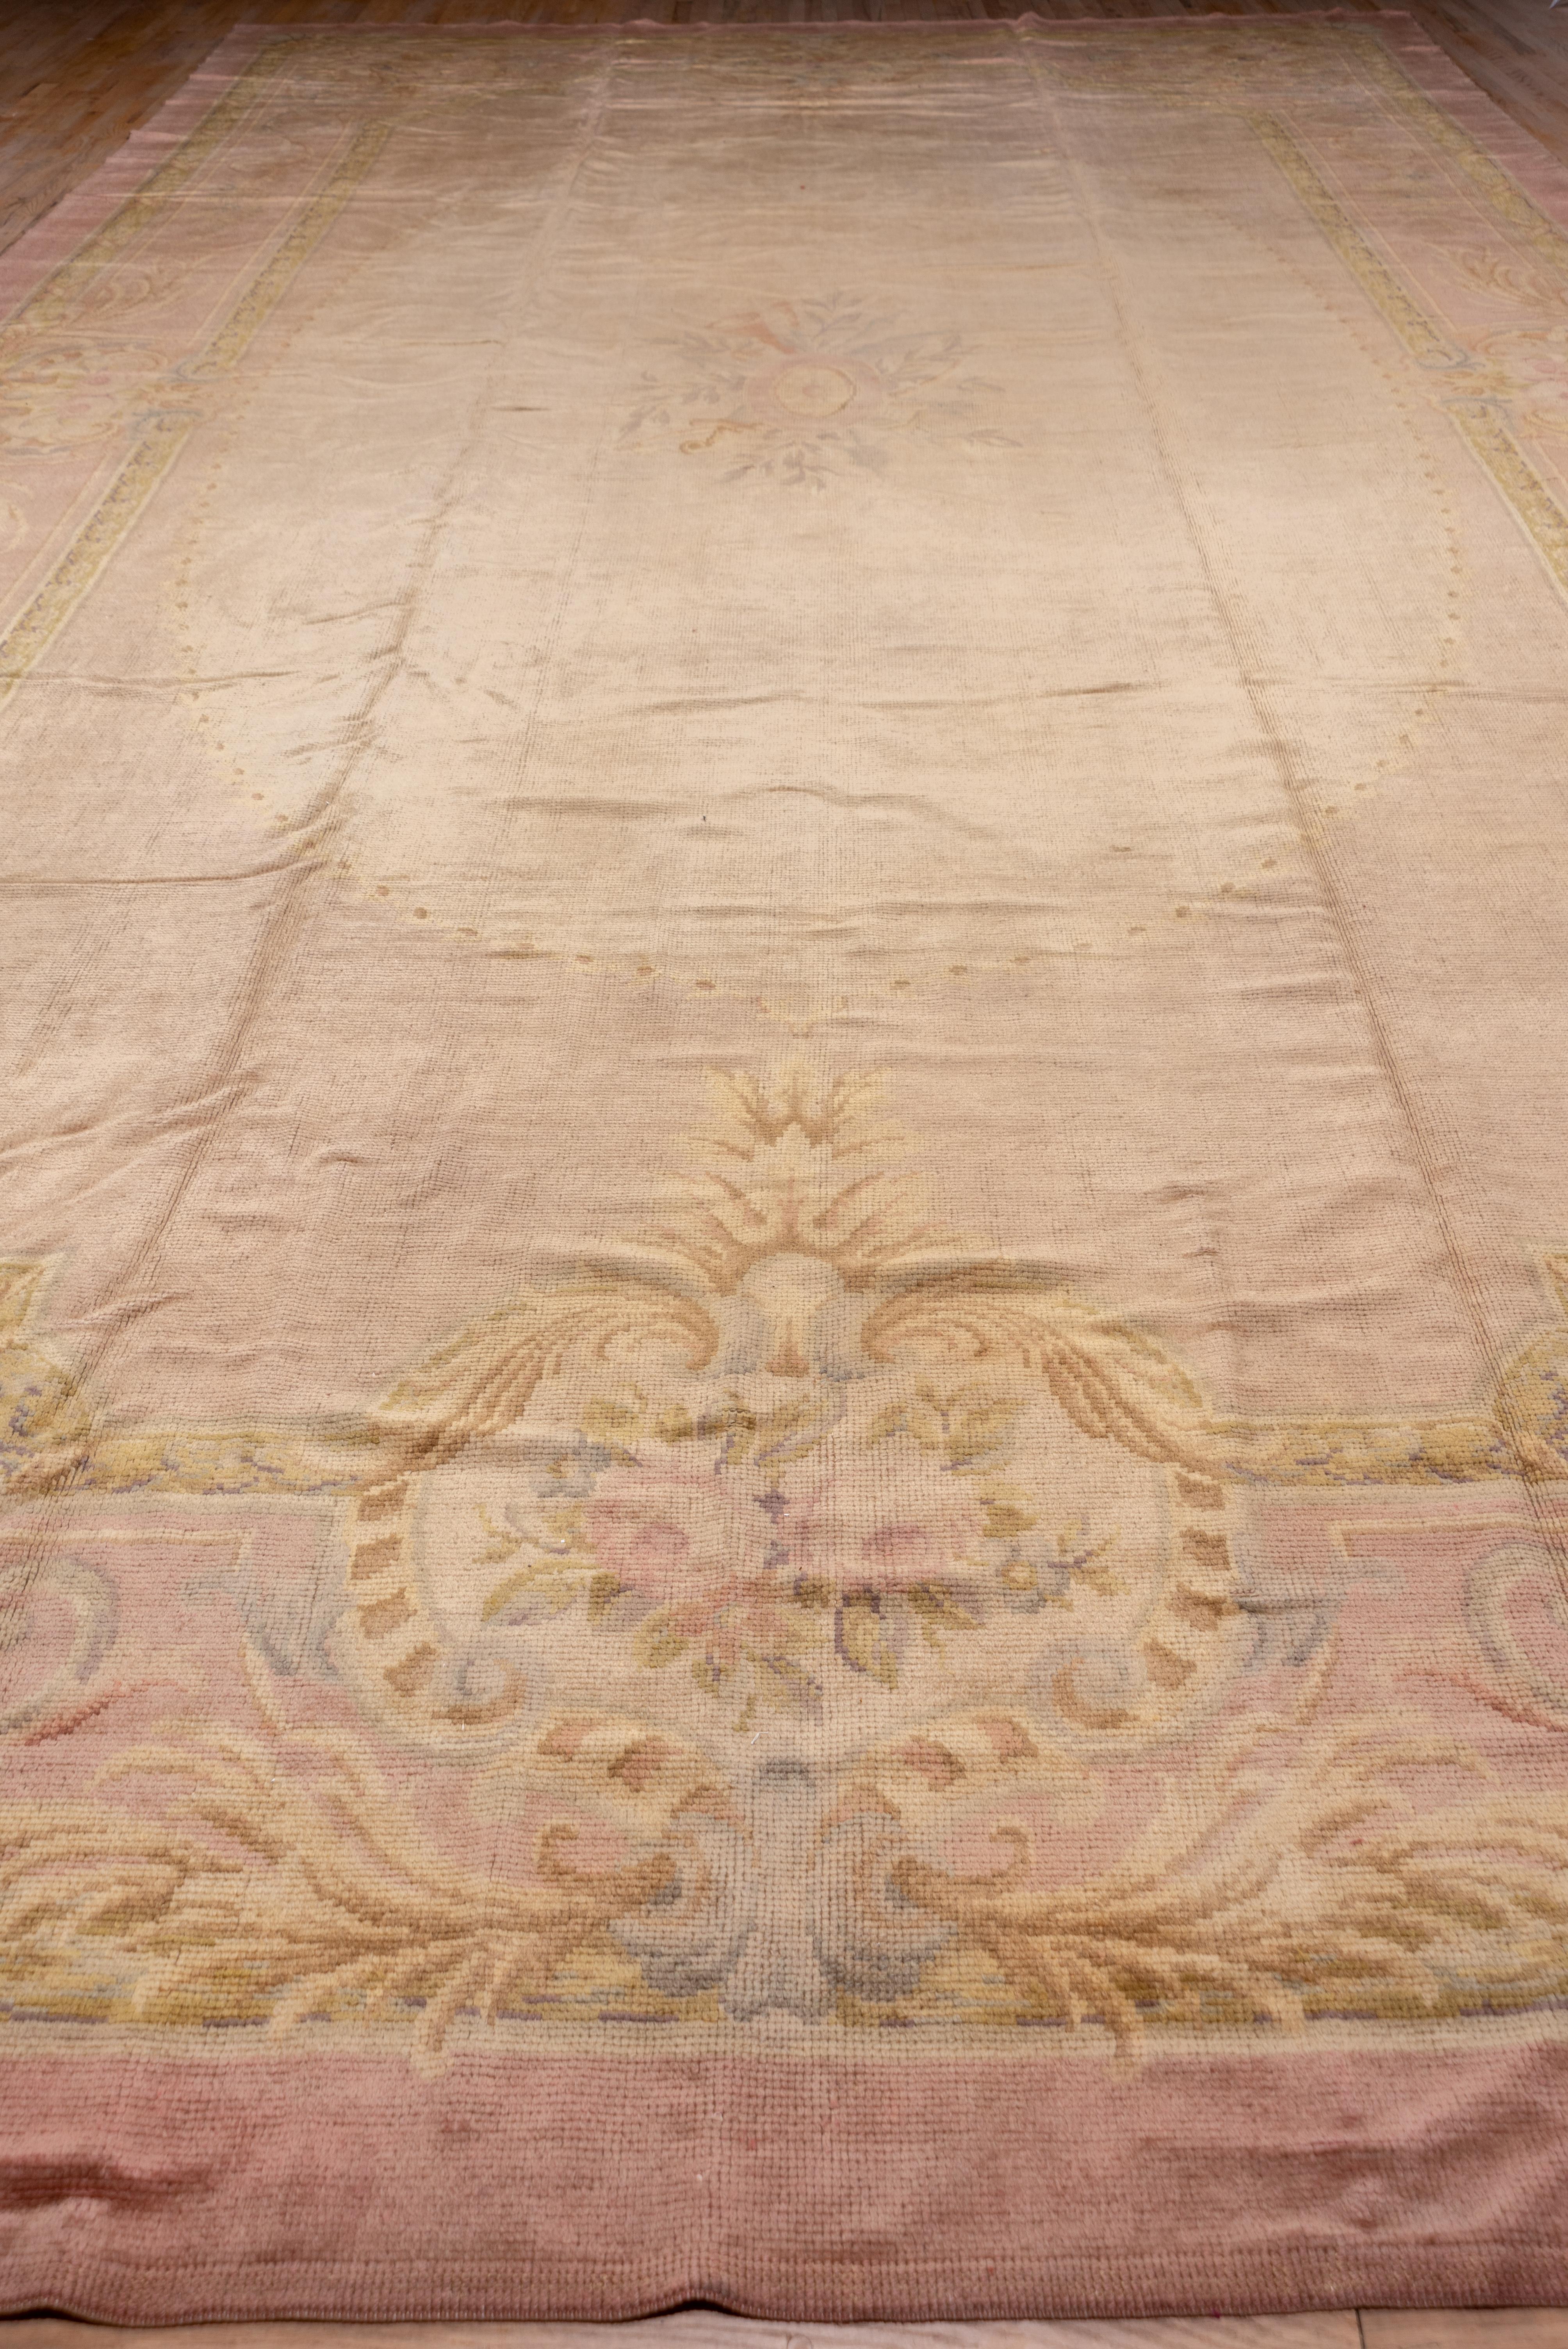 Antique French Savonnerie Mansion Carpet, Rococo Style, circa 1910s For Sale 1